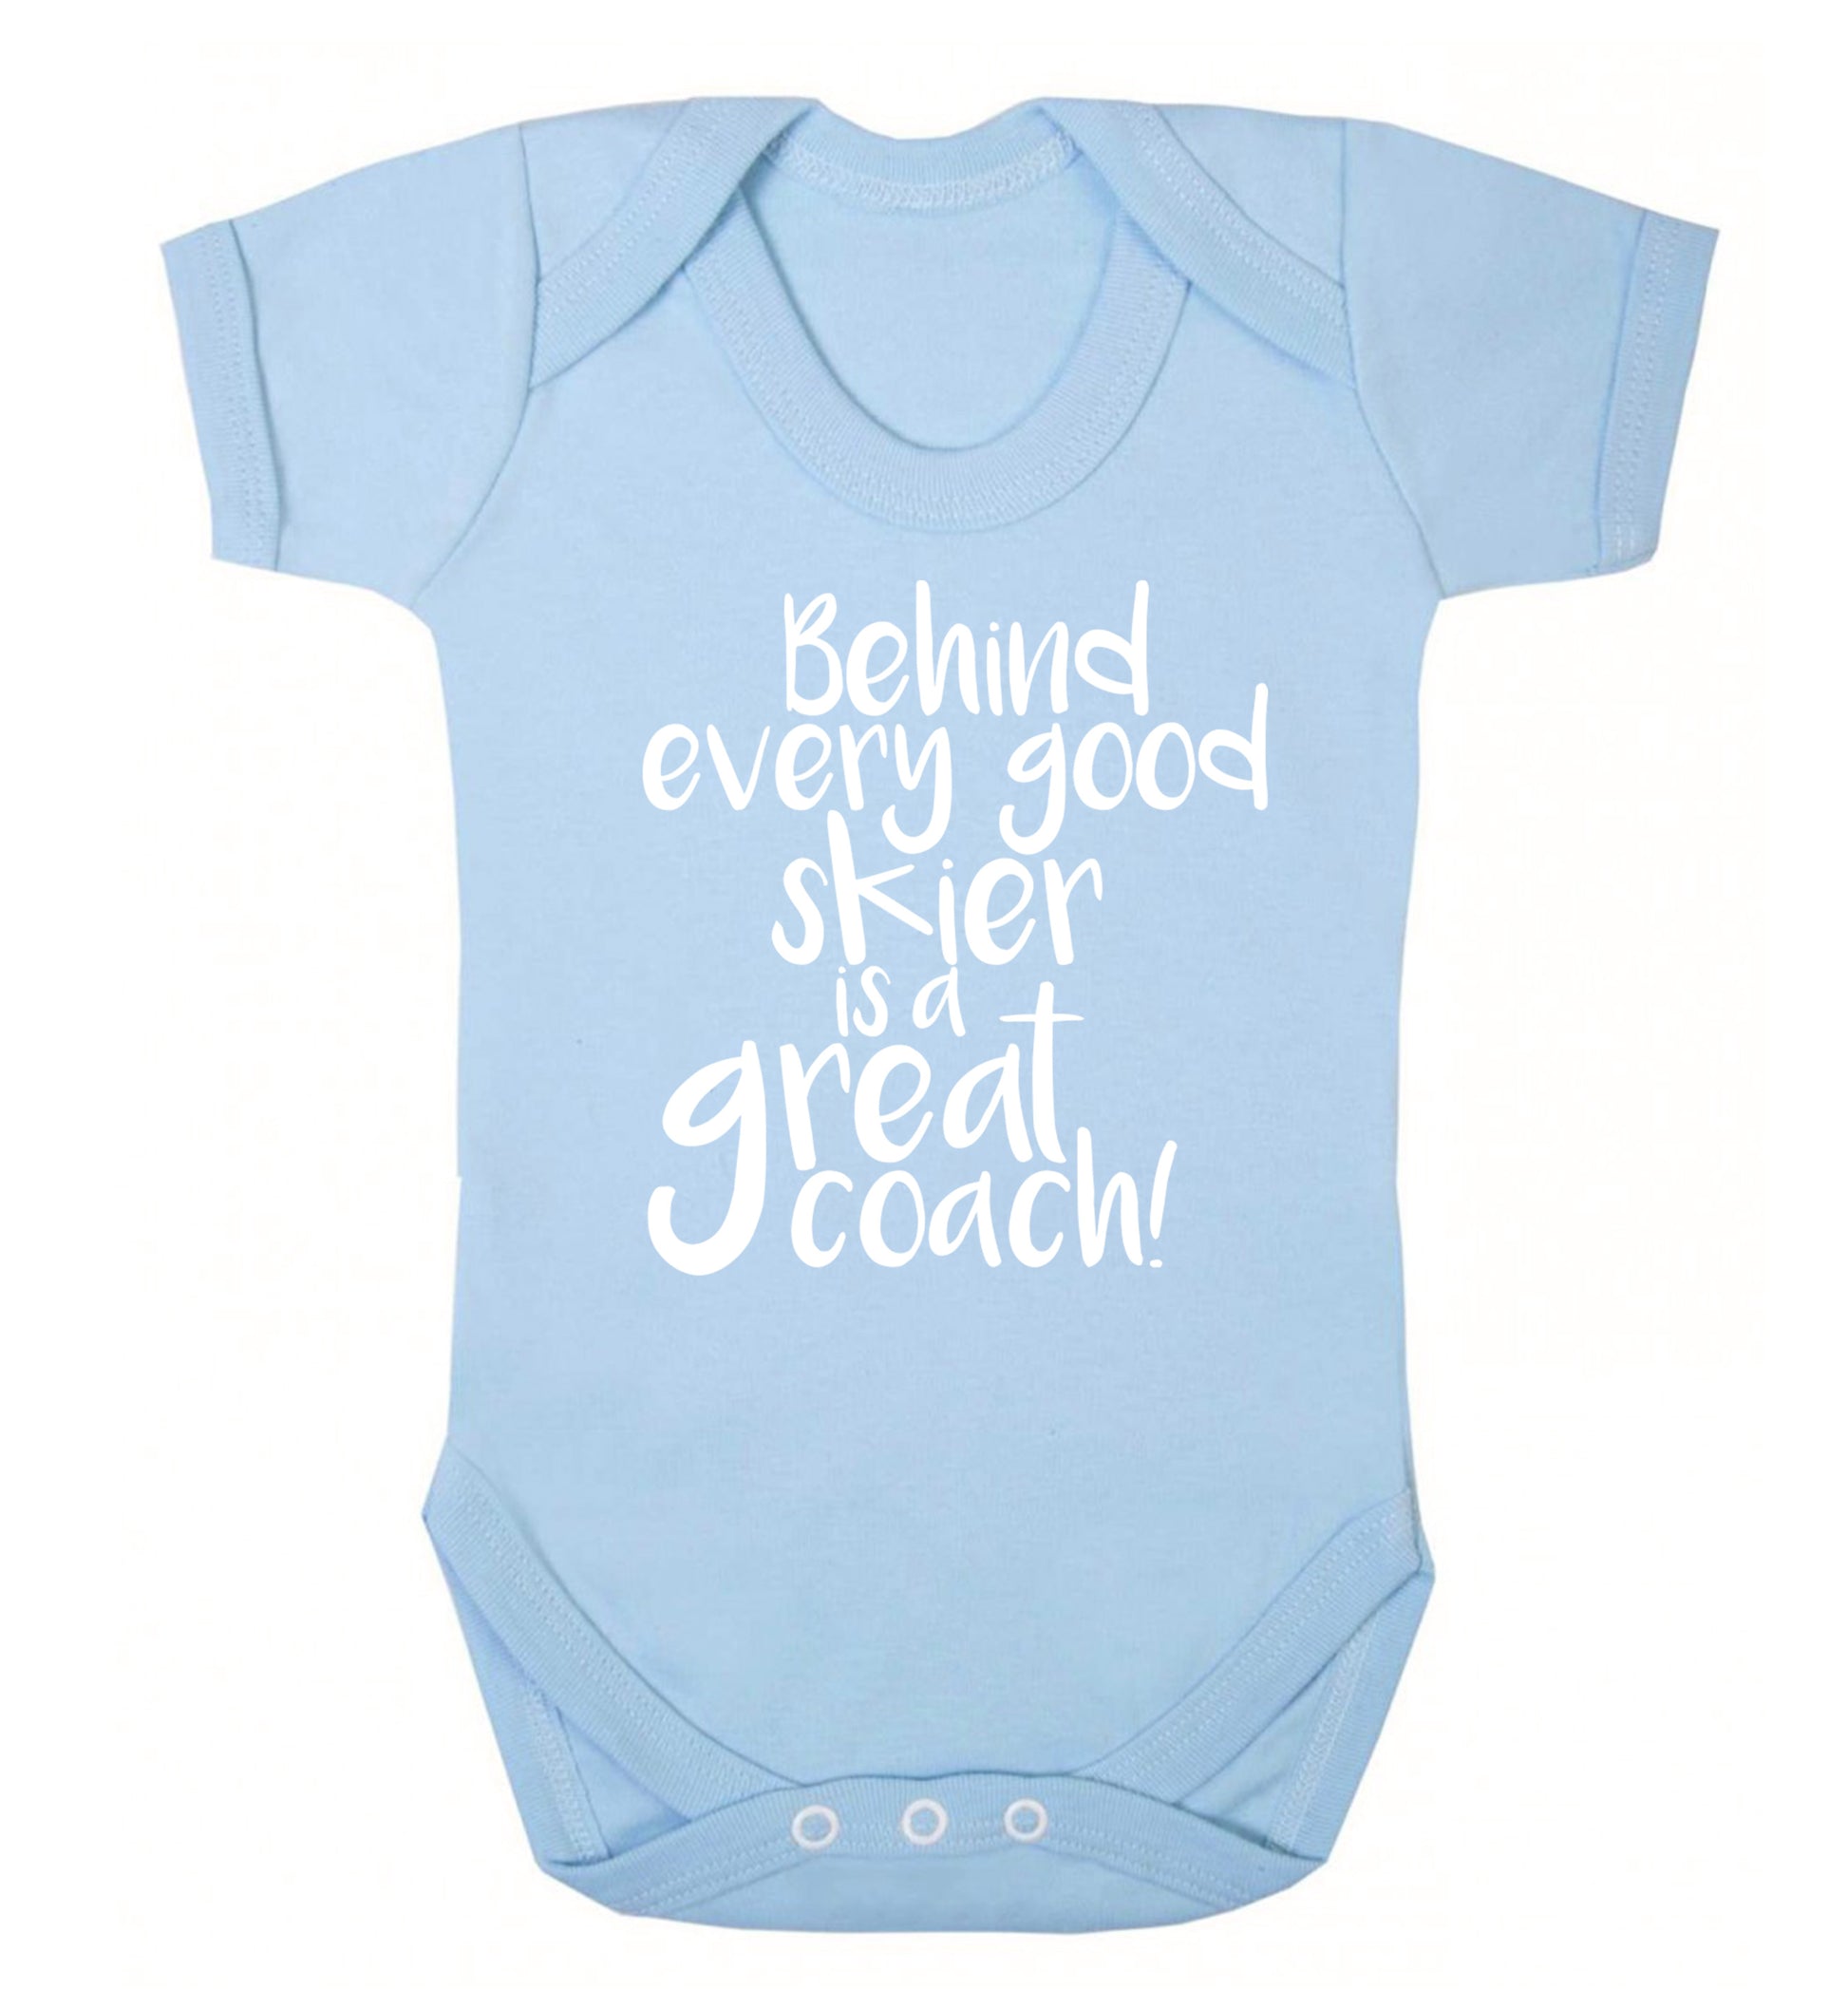 Behind every good skier is a great coach! Baby Vest pale blue 18-24 months